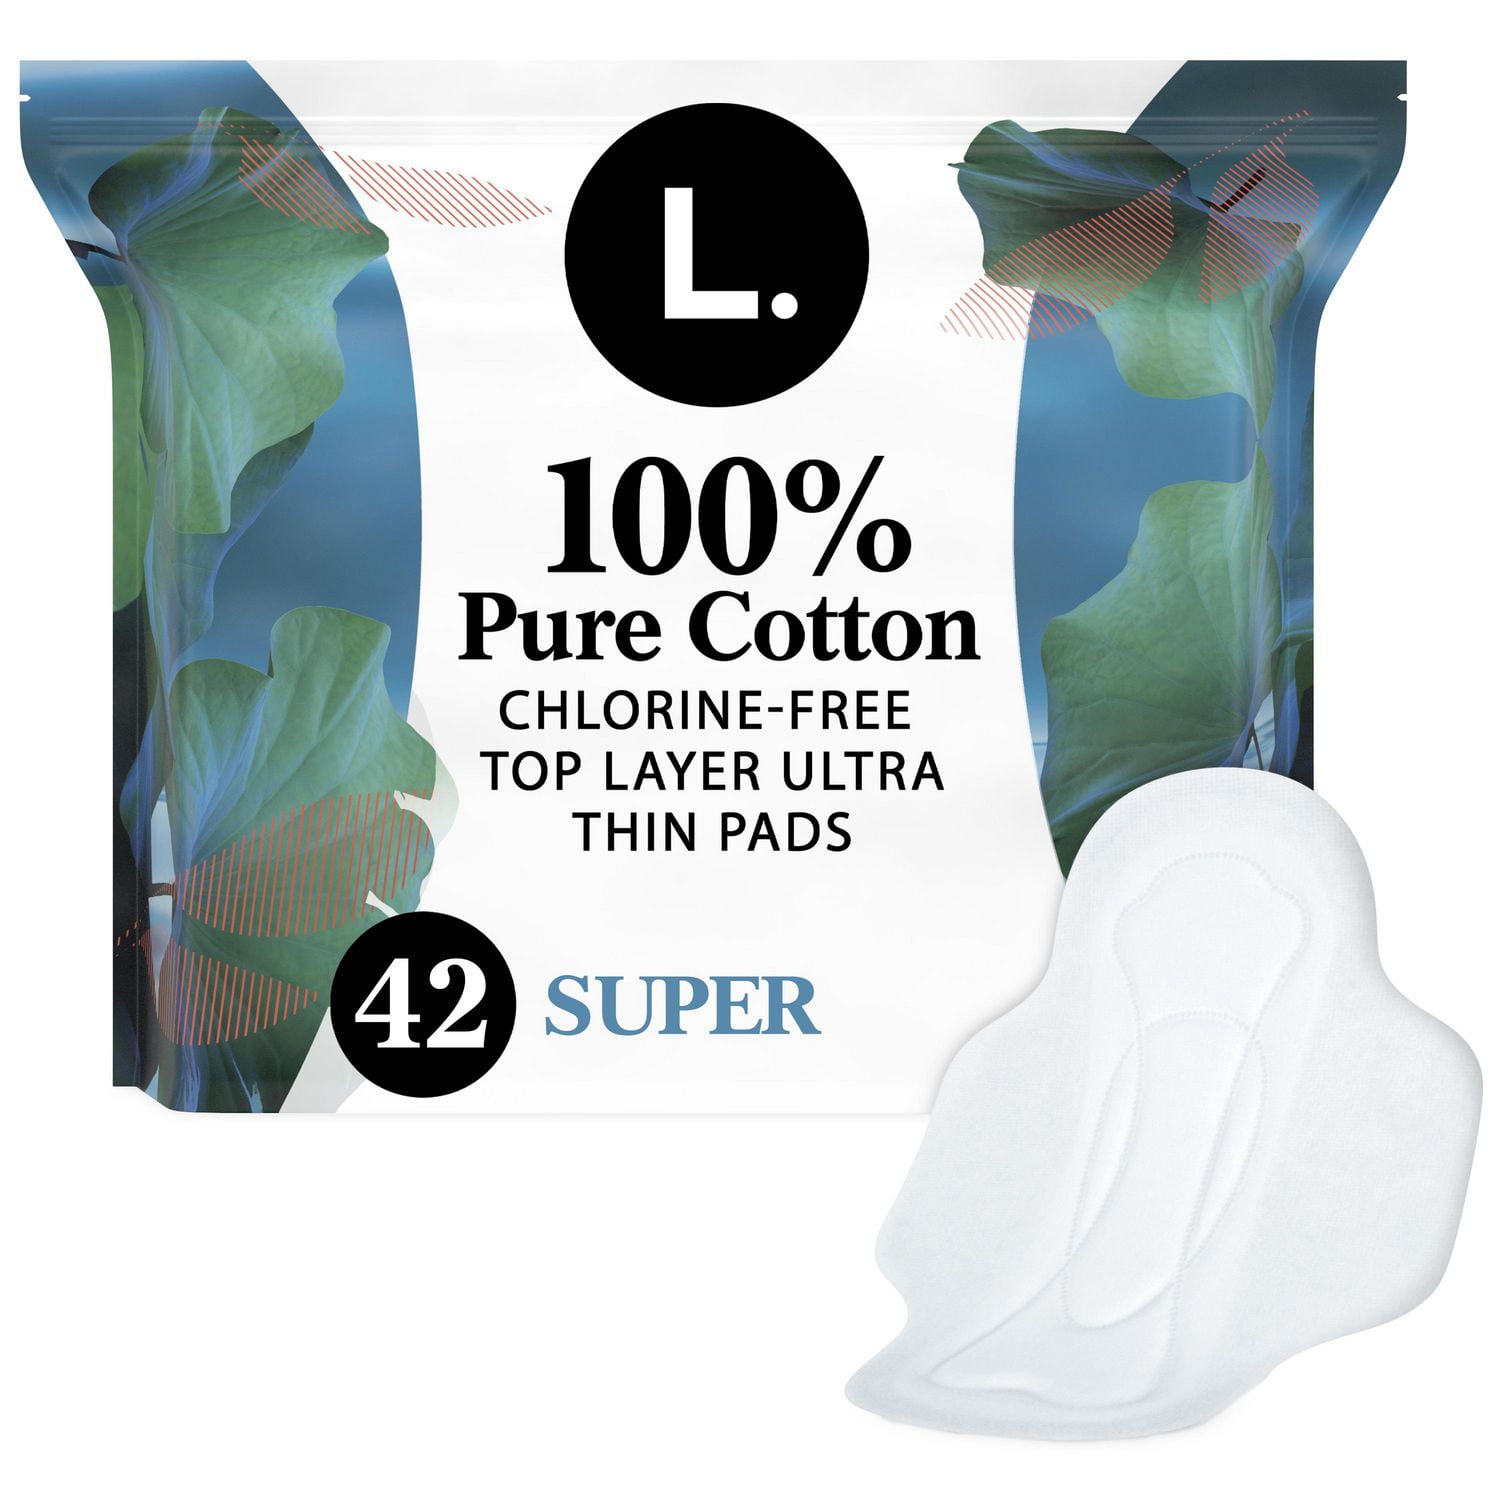 L. Ultra Thin Unscented Pads with Wings Super Absorbency 42 Ct 100% Pure  Cotton Chlorine Free Top Layer